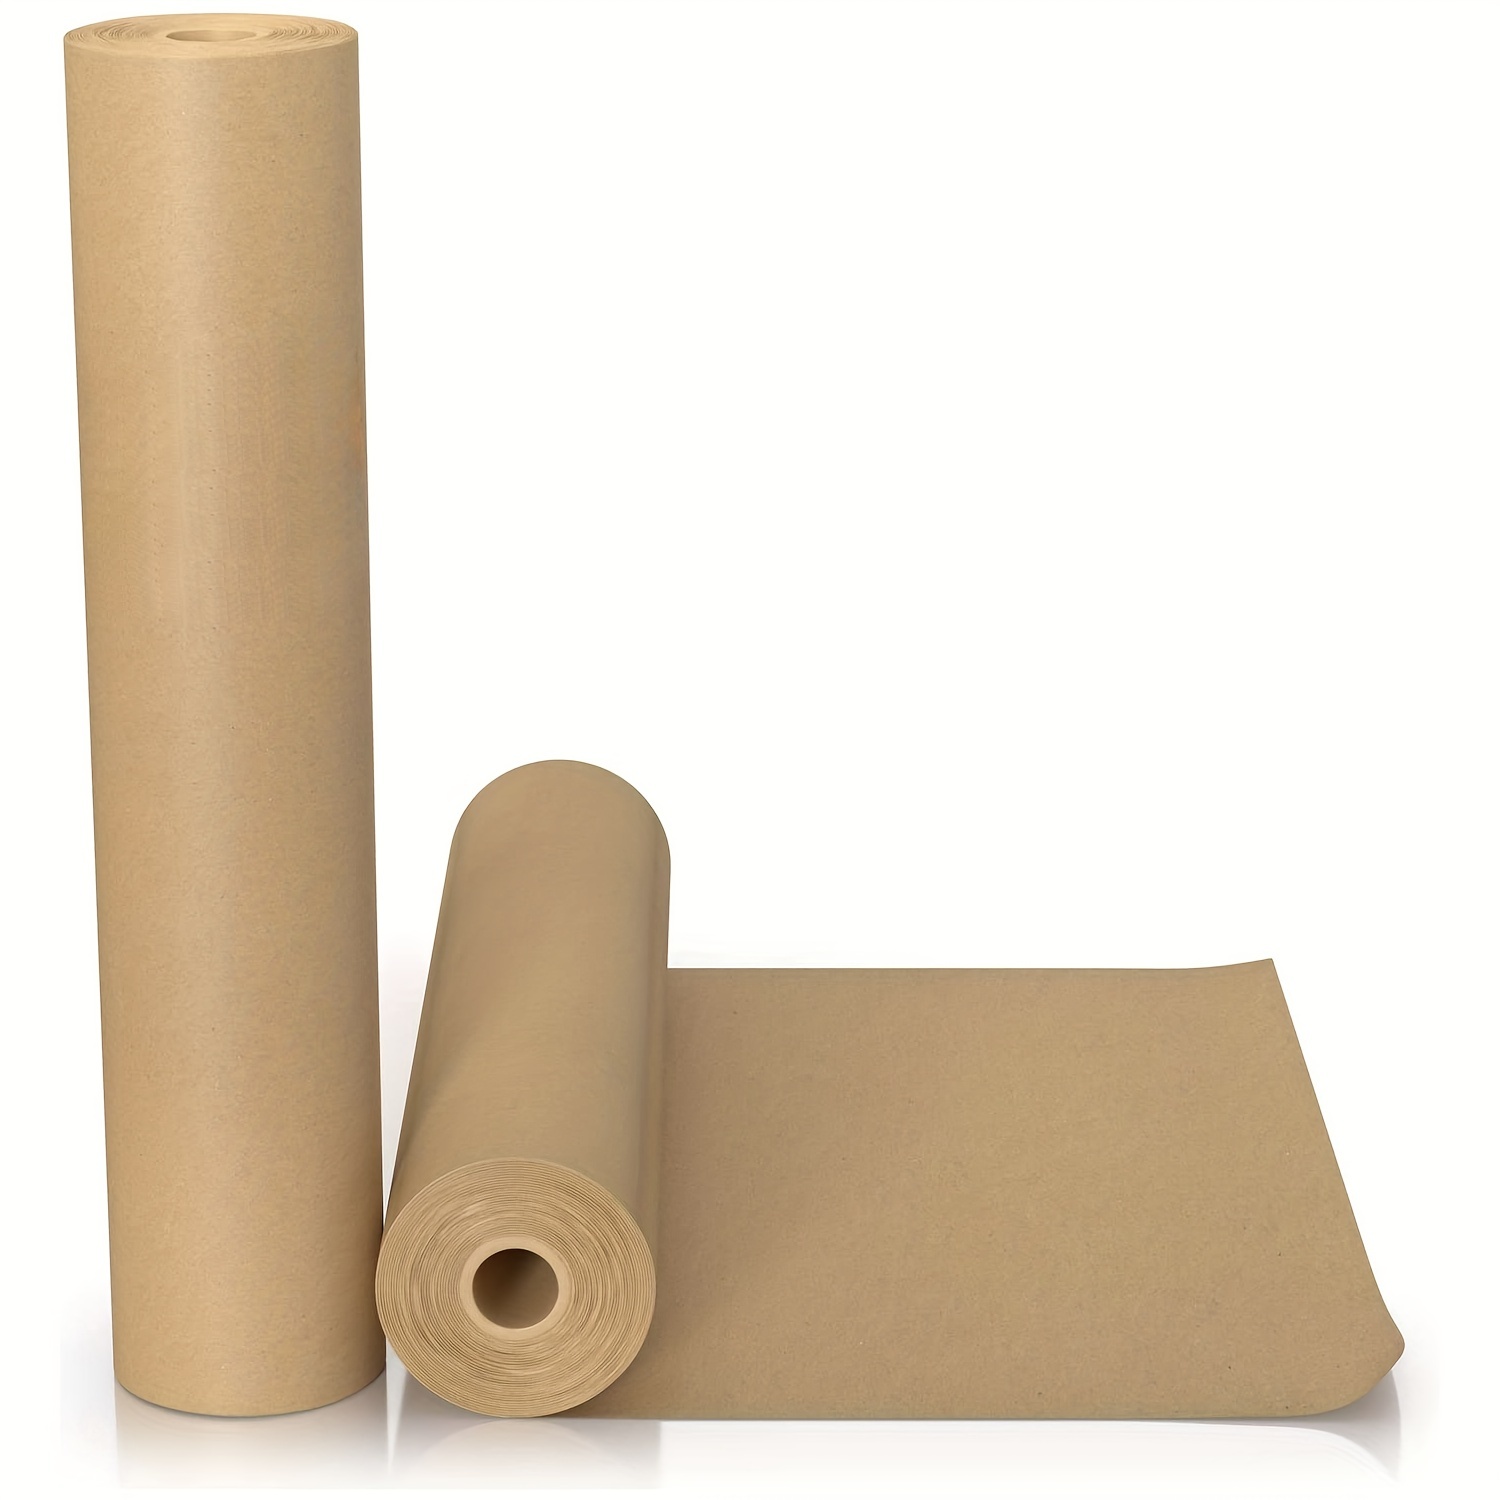 15x2000 Honeycomb Packing Paper for Moving Breakables, Shipping